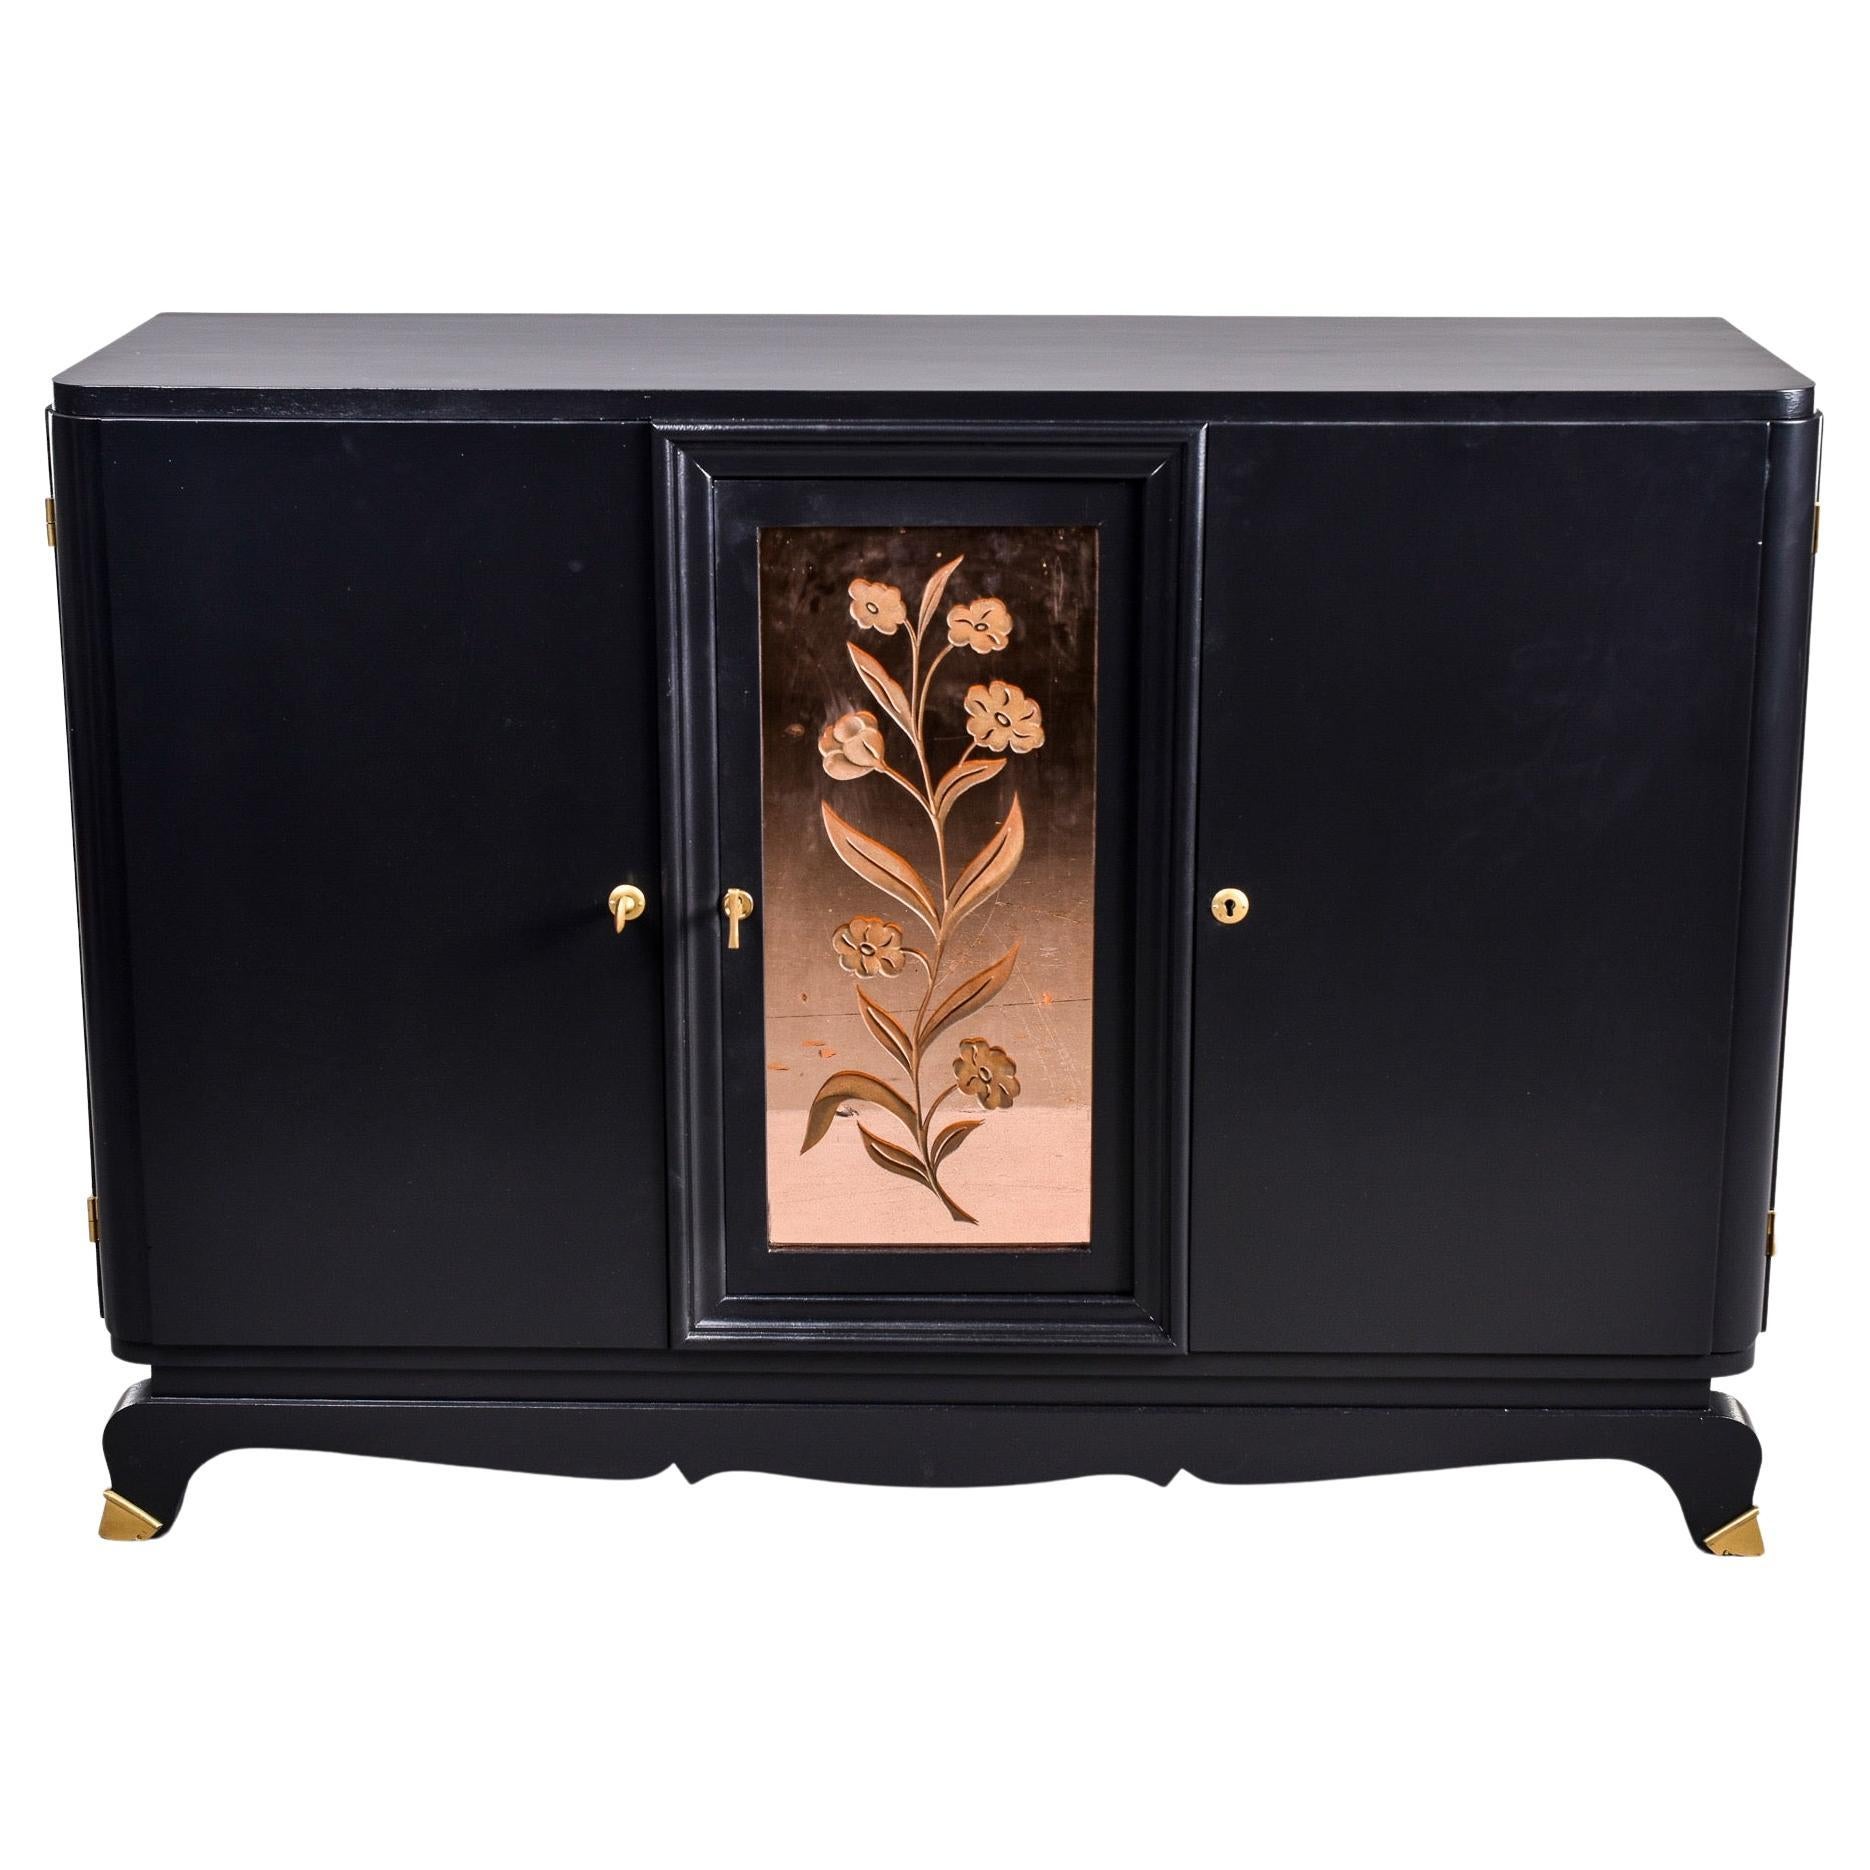 French Art Deco Buffet Cabinet with Black Finish and Mirrored Center Panel